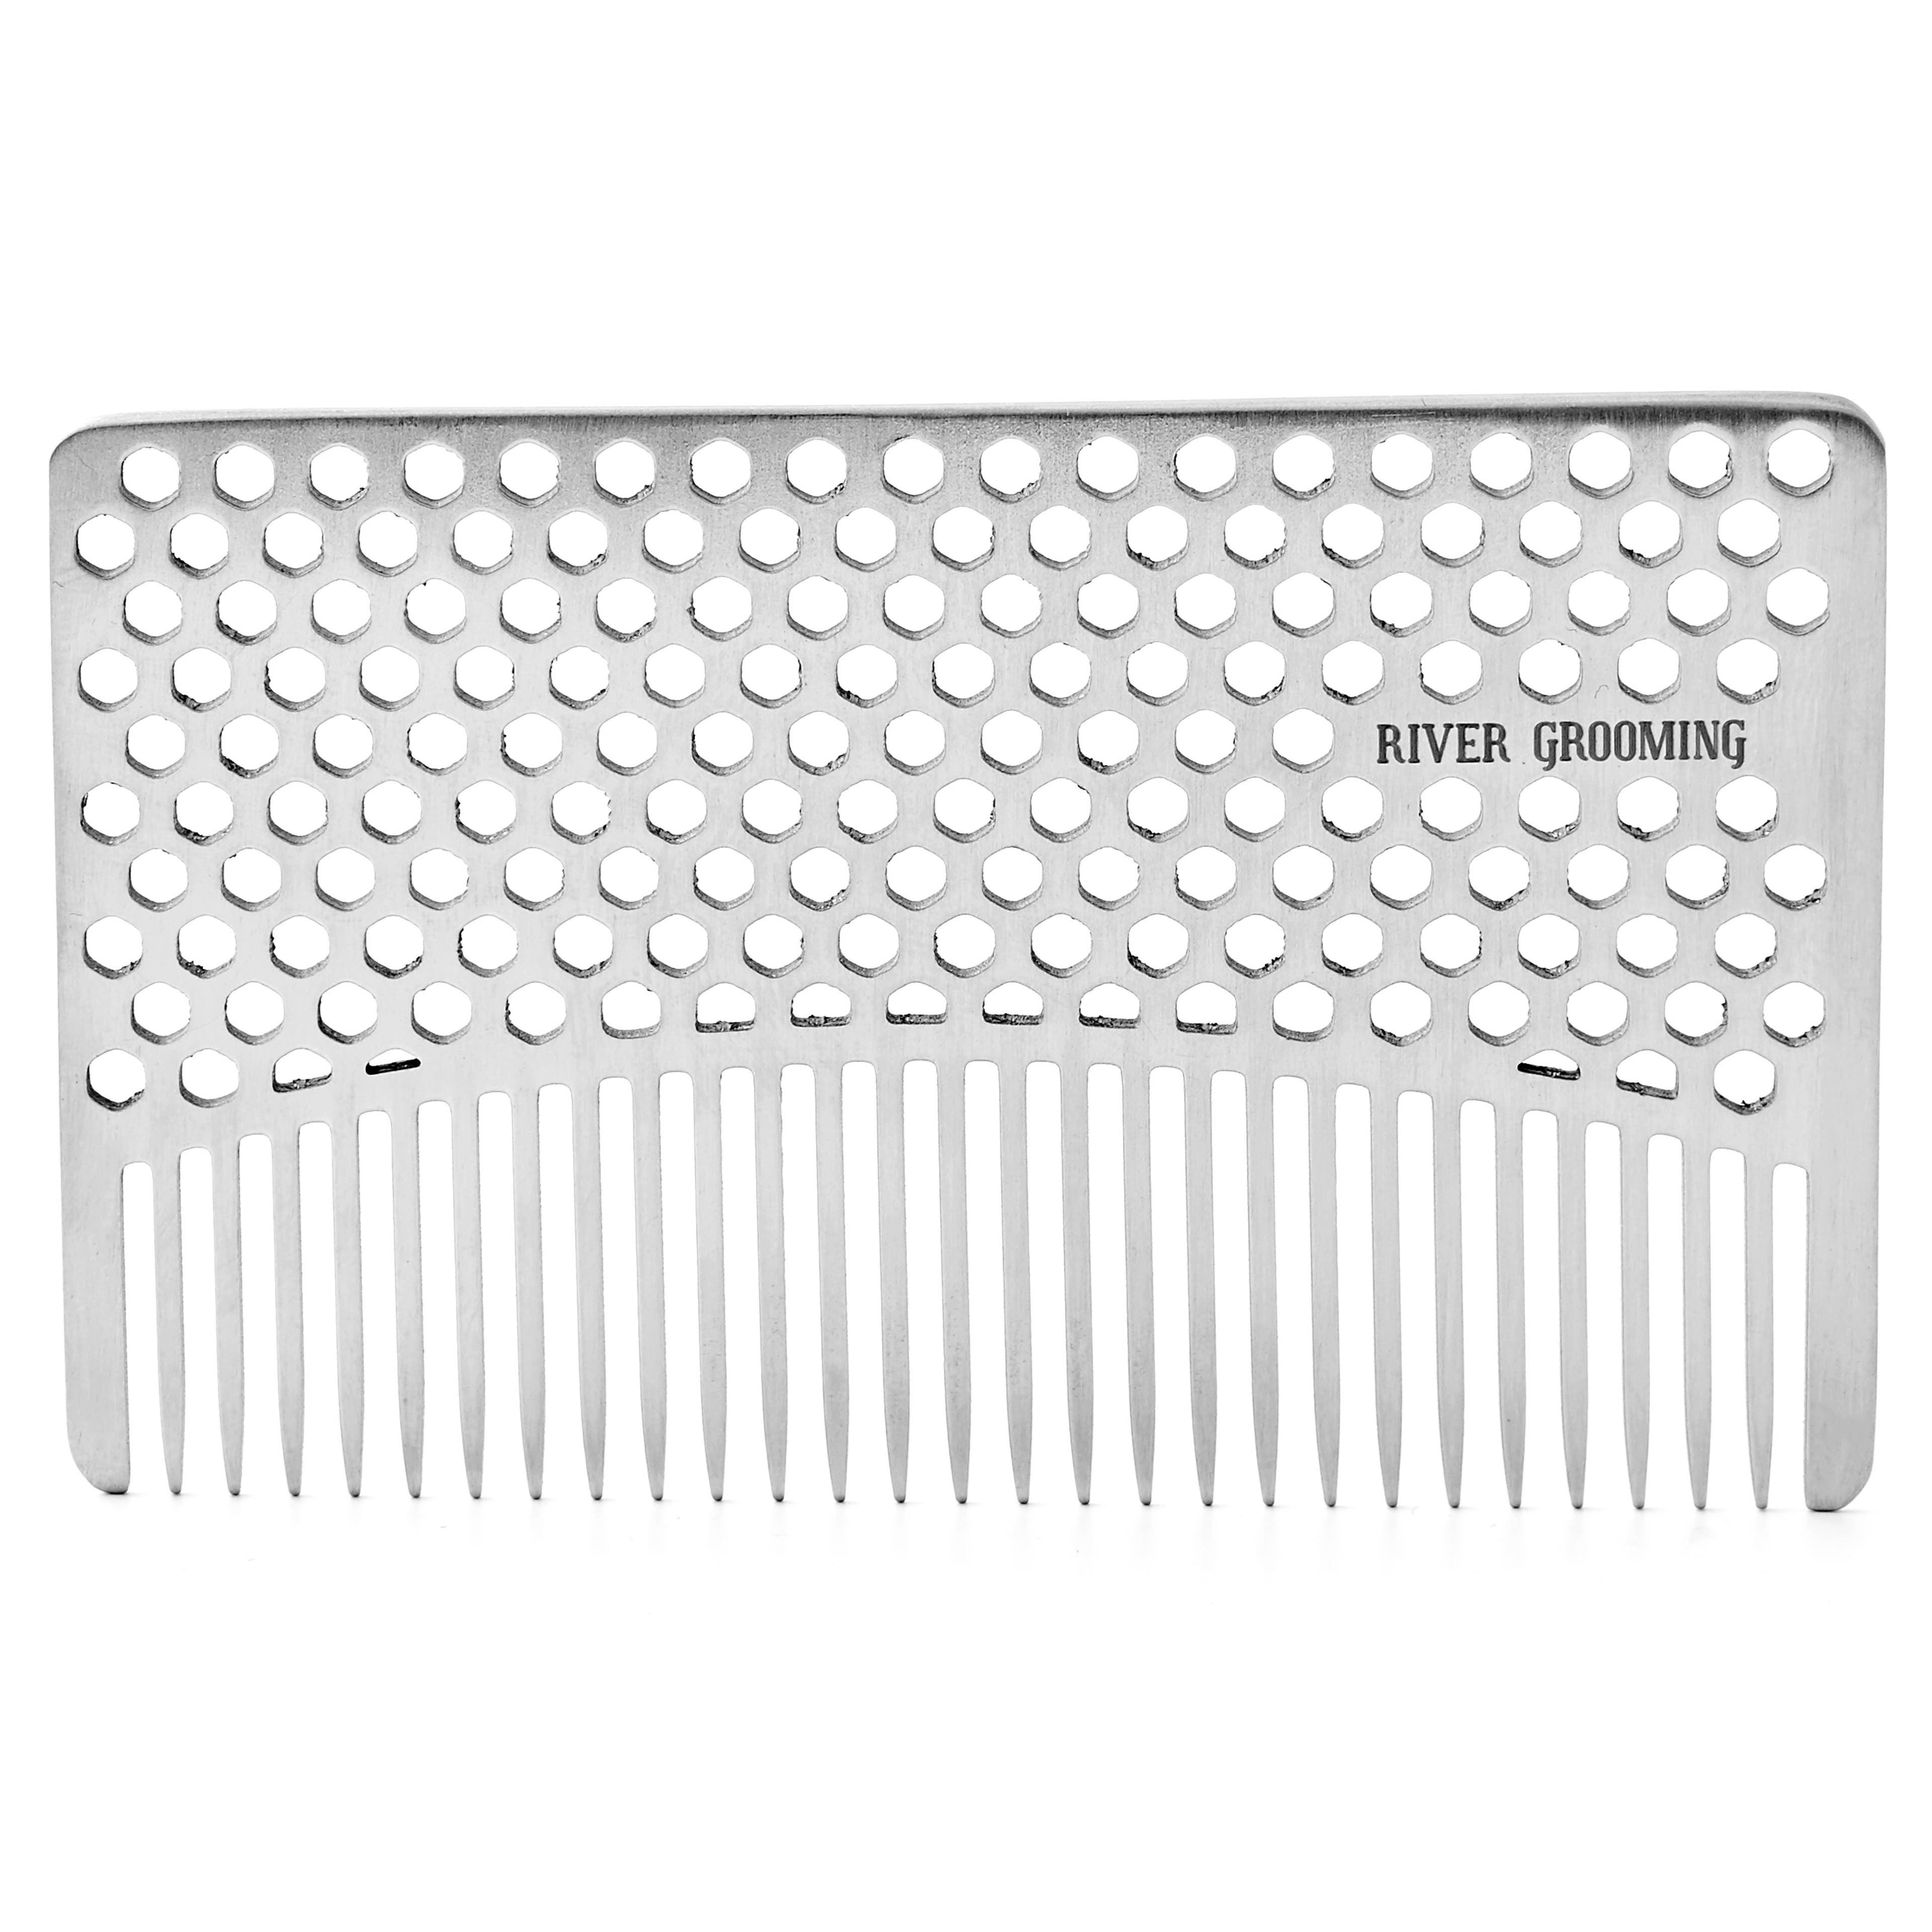 Credit Card Size Stainless Steel Comb